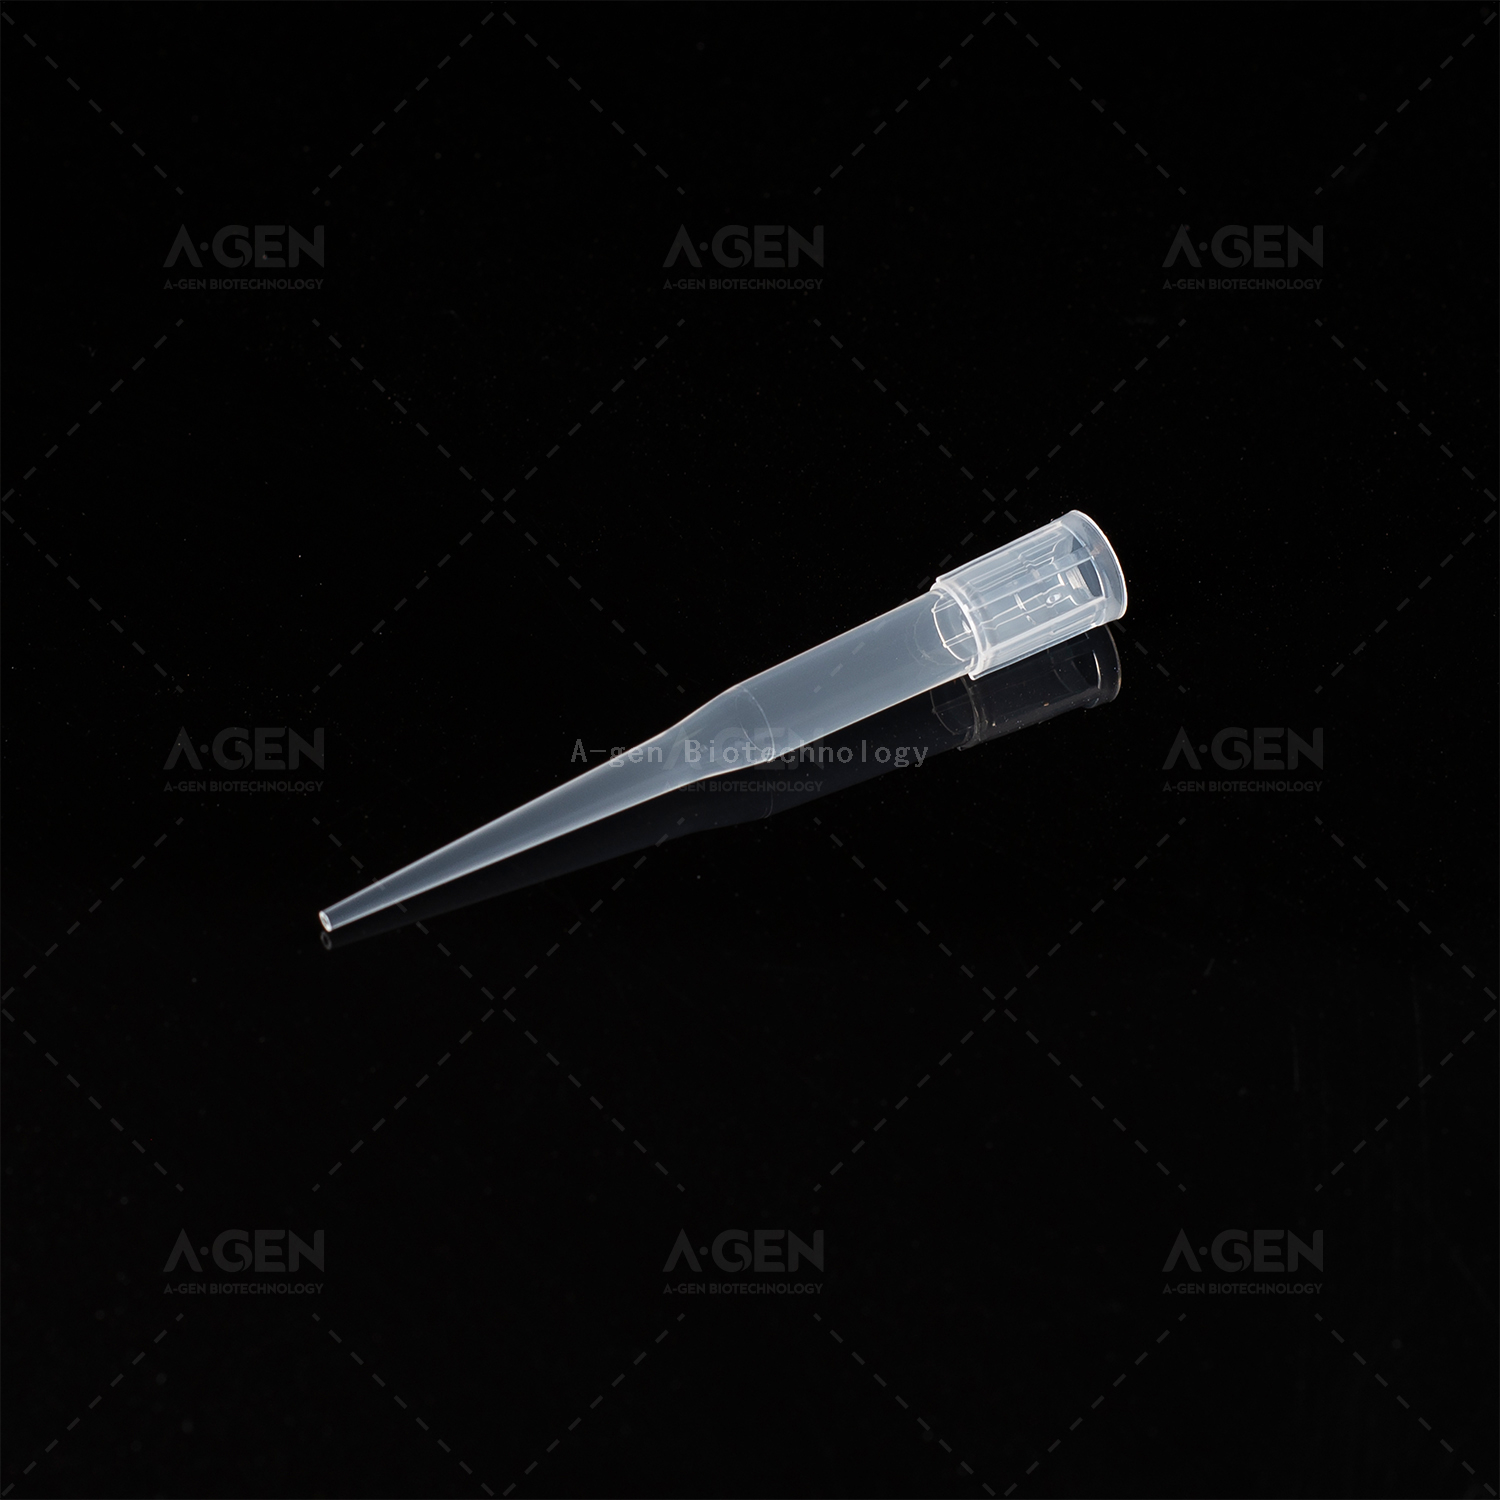 BECKMAN Tip 250μL Clear Robotic PP Pipette Tip (Racked,sterile) for Liquid Transfer No Filter